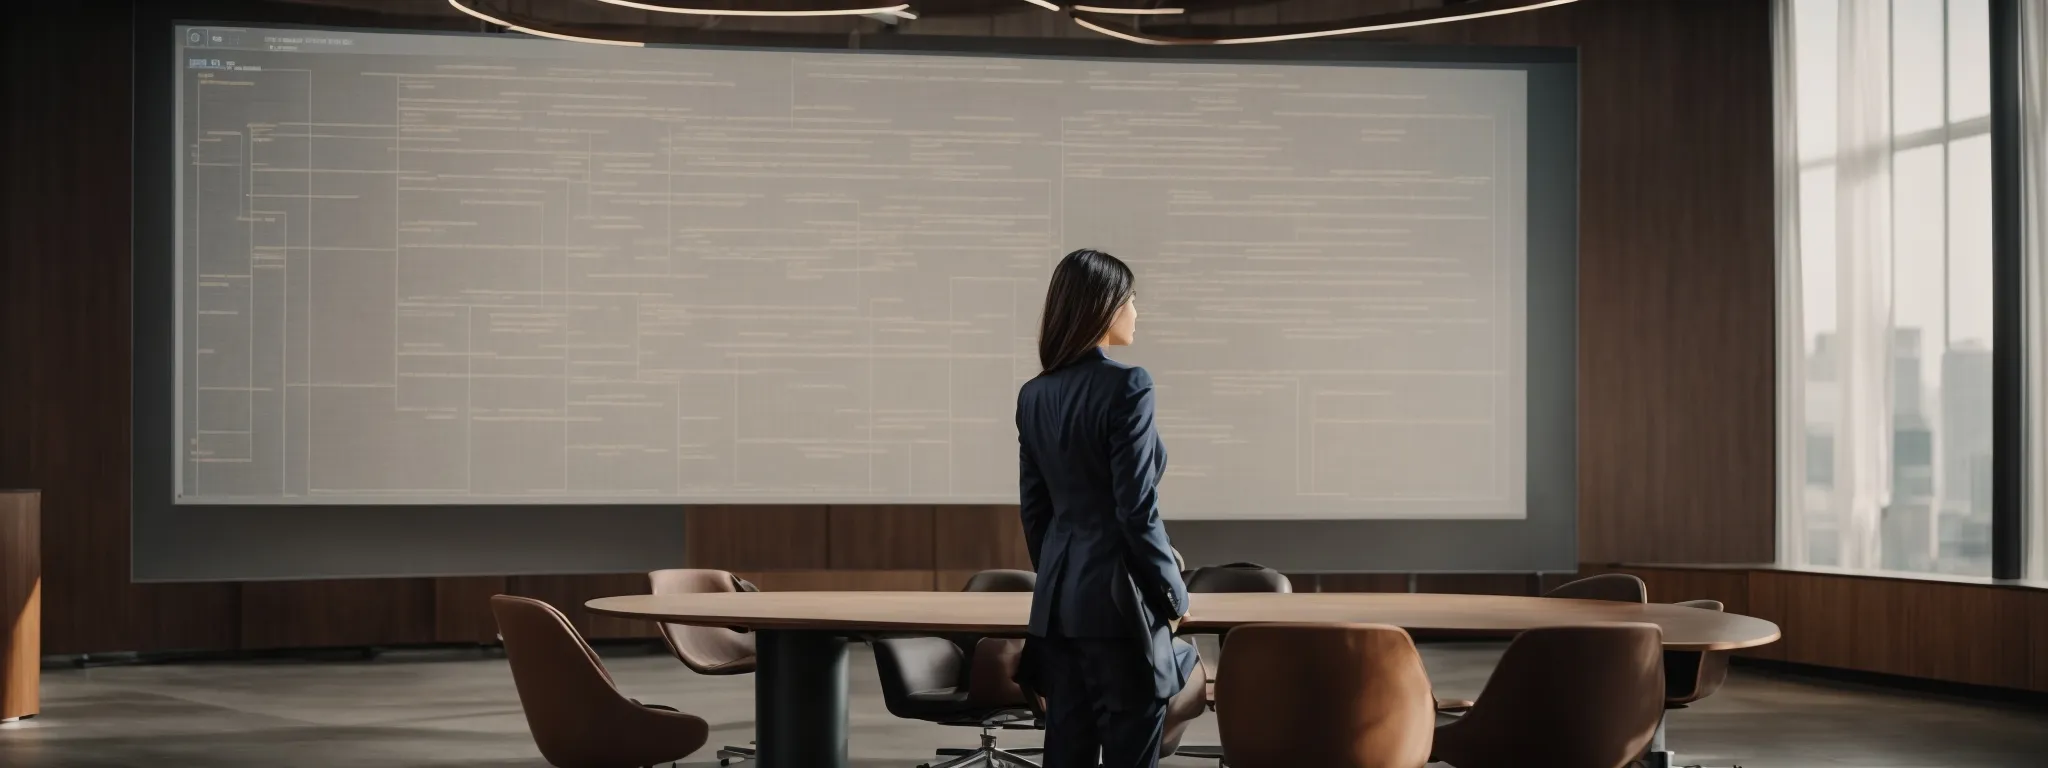 a woman in a business suit standing before a large conference room screen displaying a dynamic web structure diagram.